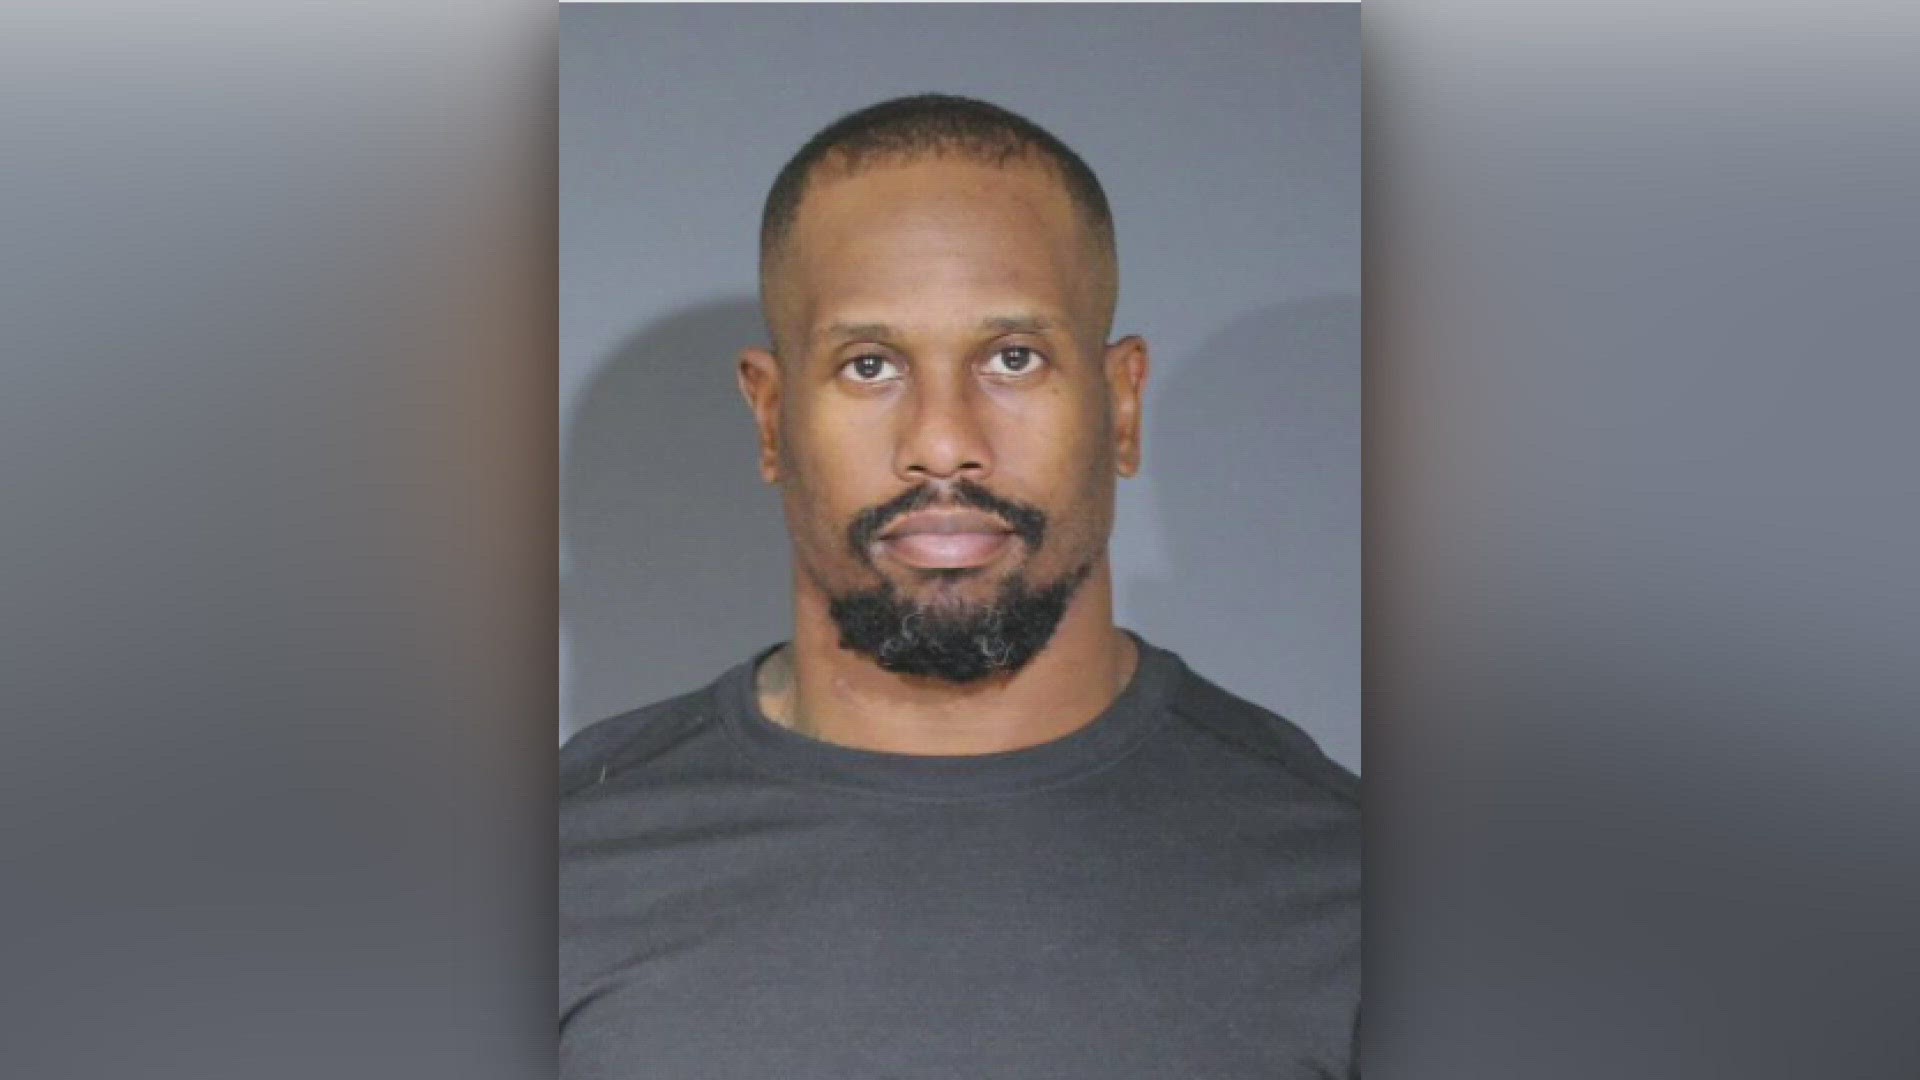 WFAA has obtained the 911 call NFL star Von Miller's girlfriend placed on Wednesday.